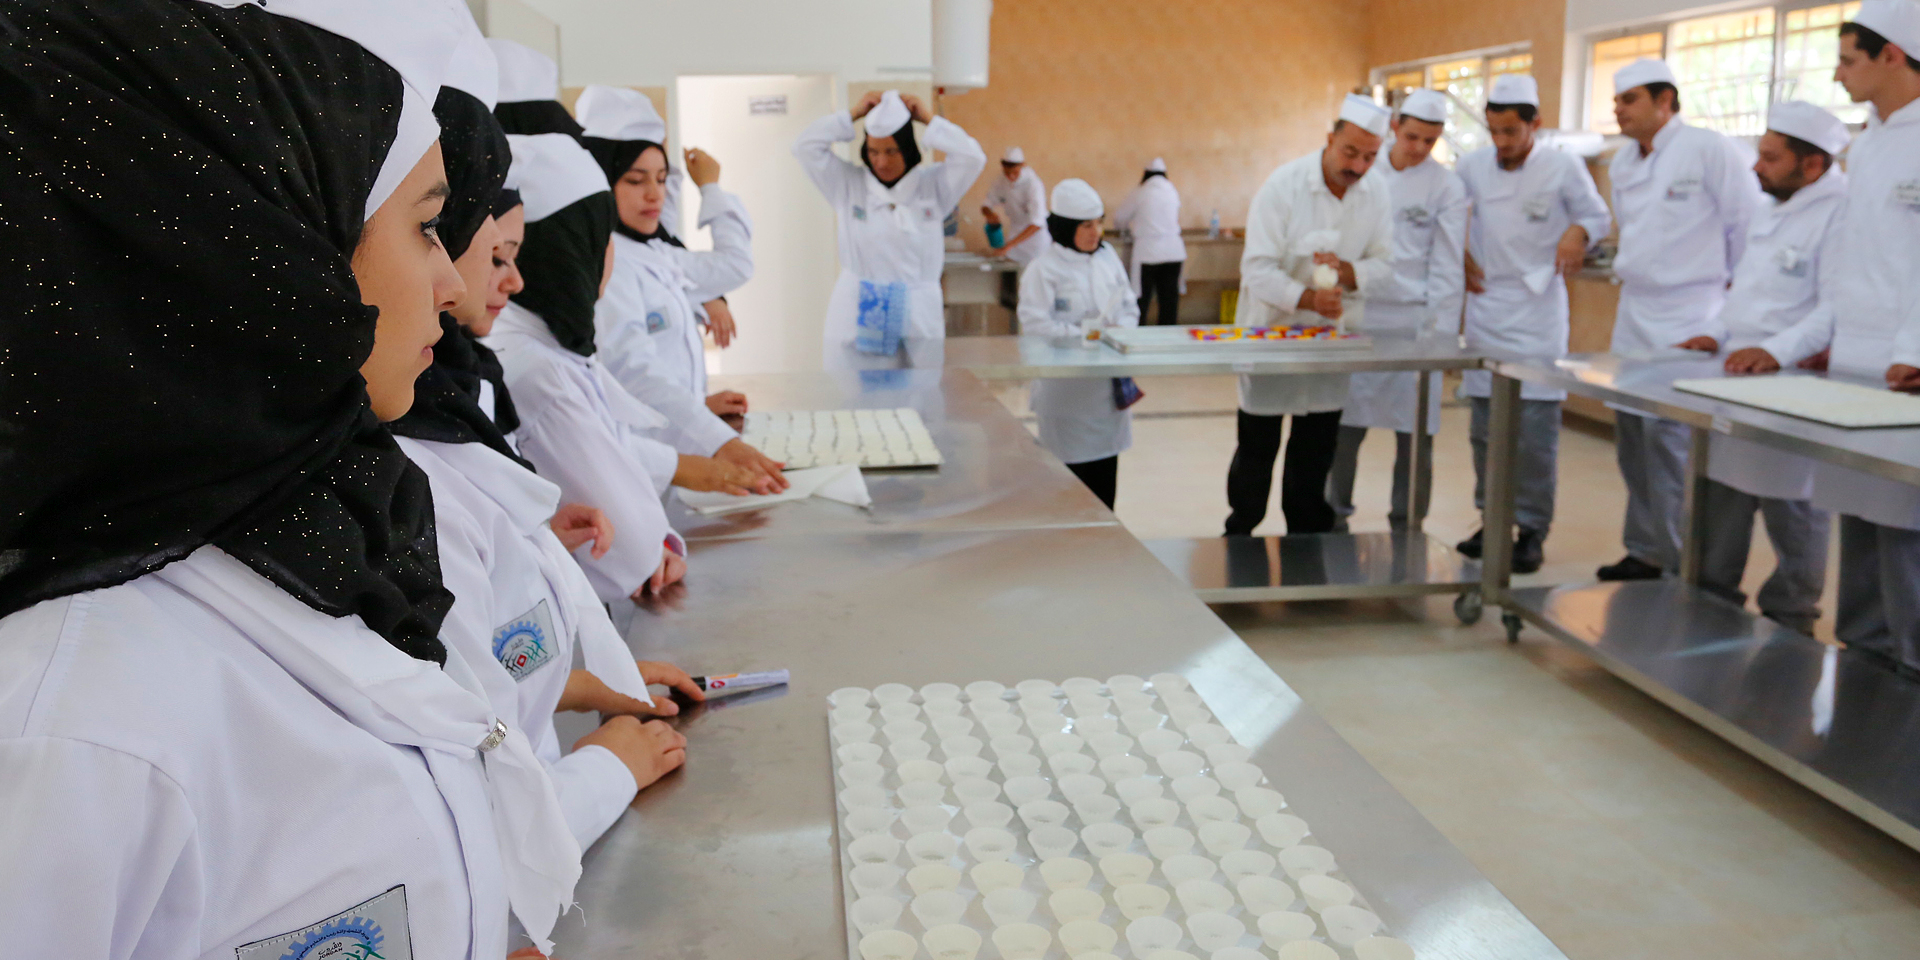 A room filled with cooks standing around silver tables with paper cups on a cookie sheet sitting upon them. A chef stands in the center demonstrating a preparation method.